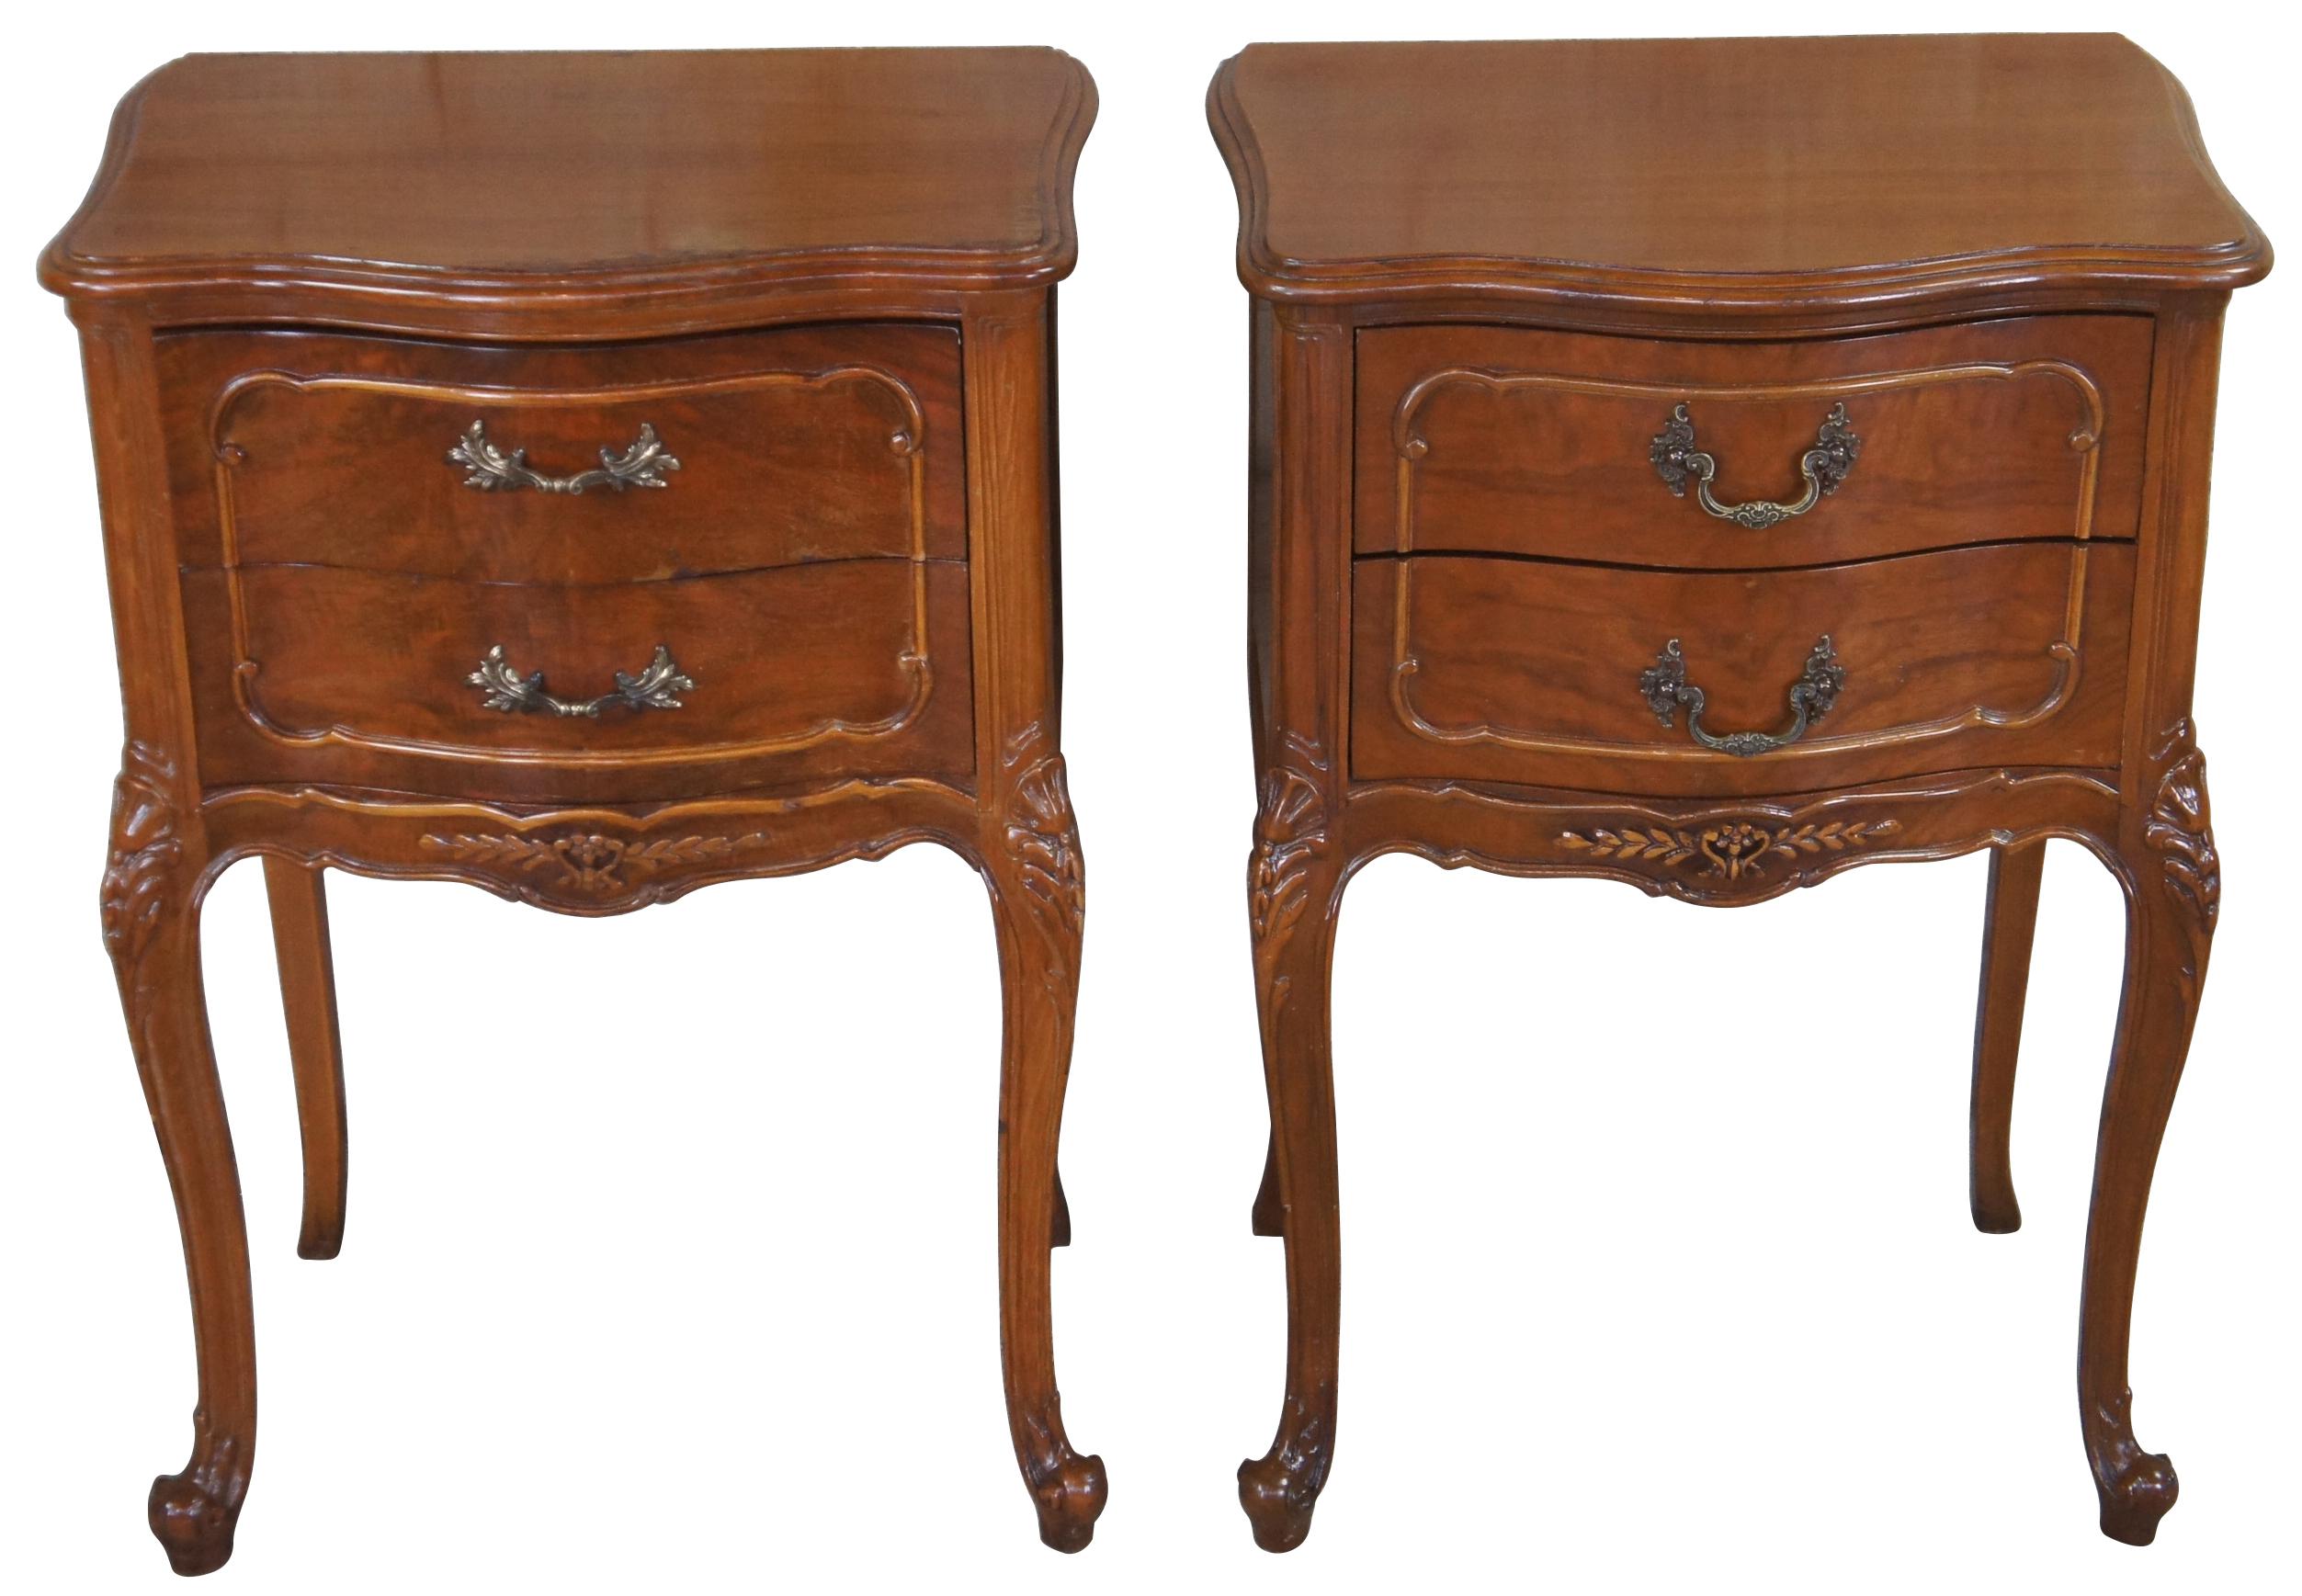 Circa 1940s French nightstands or end tables. Made from walnut with a serpentine front and crotch veneered drawers. Features carved accents, scalloped brass hardware, cabriole legs and glass tops.
  